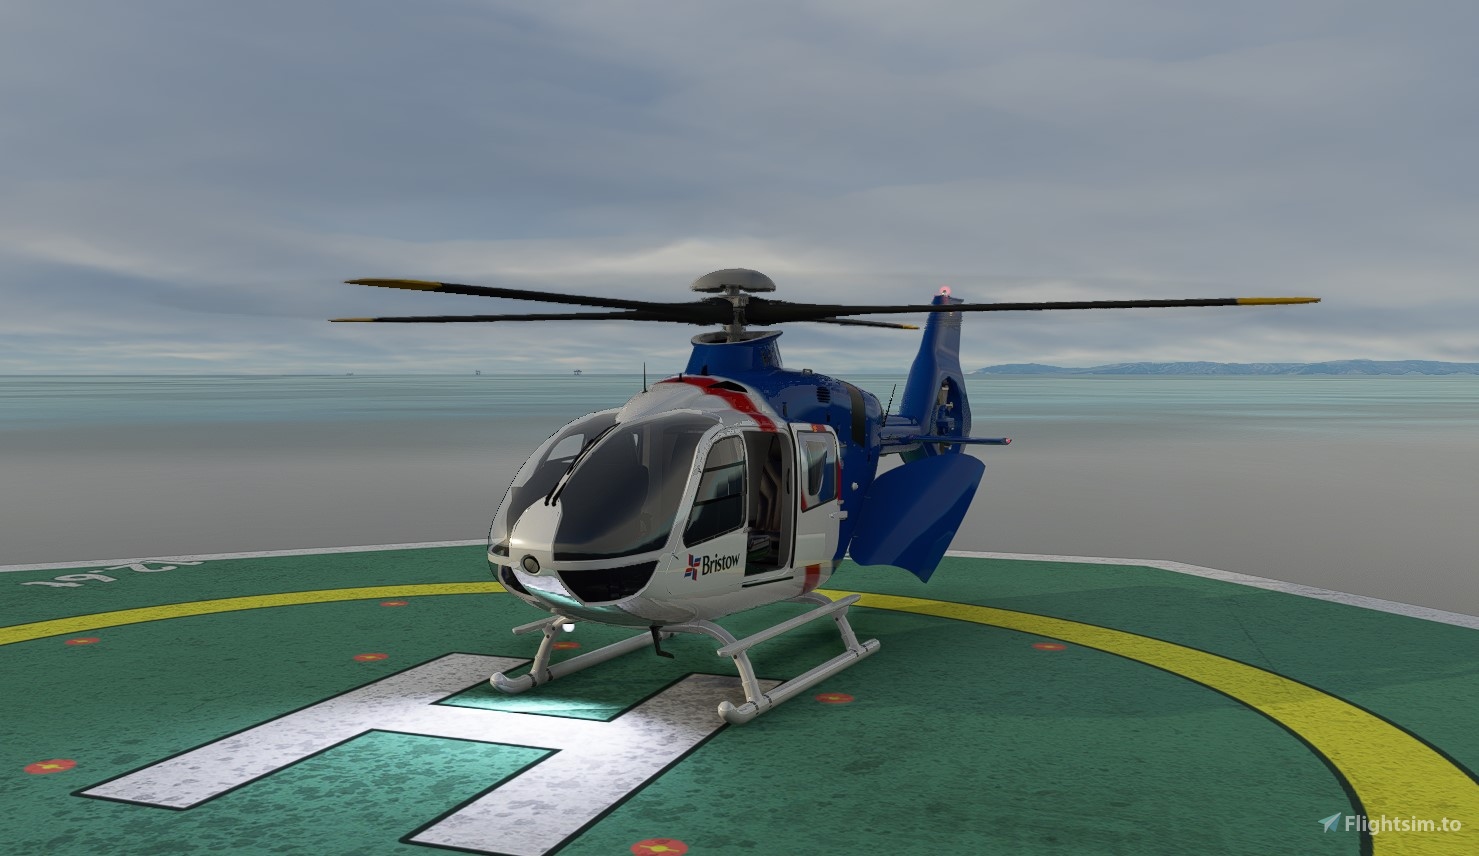 sims 3 helicopter